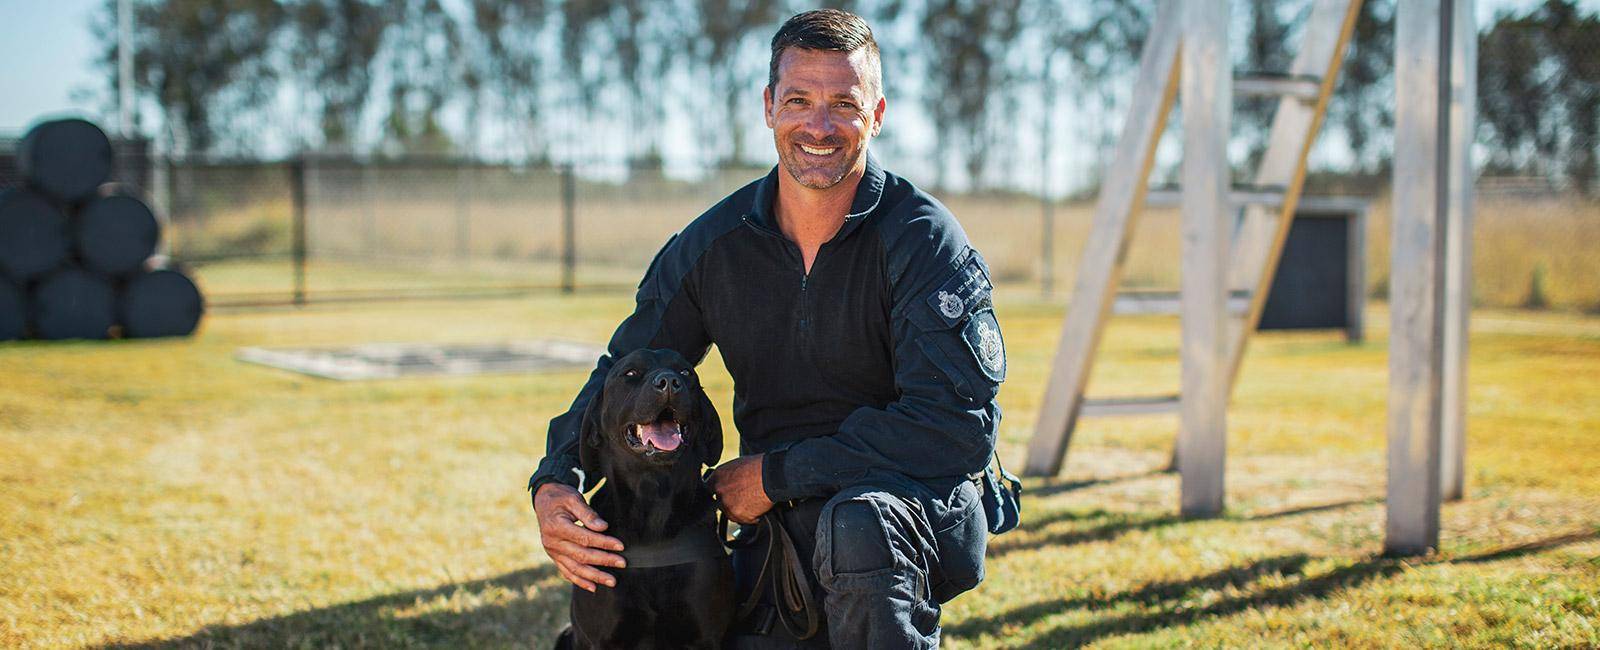 Senior Constable Scott Lewis and Firearms and Explosives Detector Dog Naya make a great team